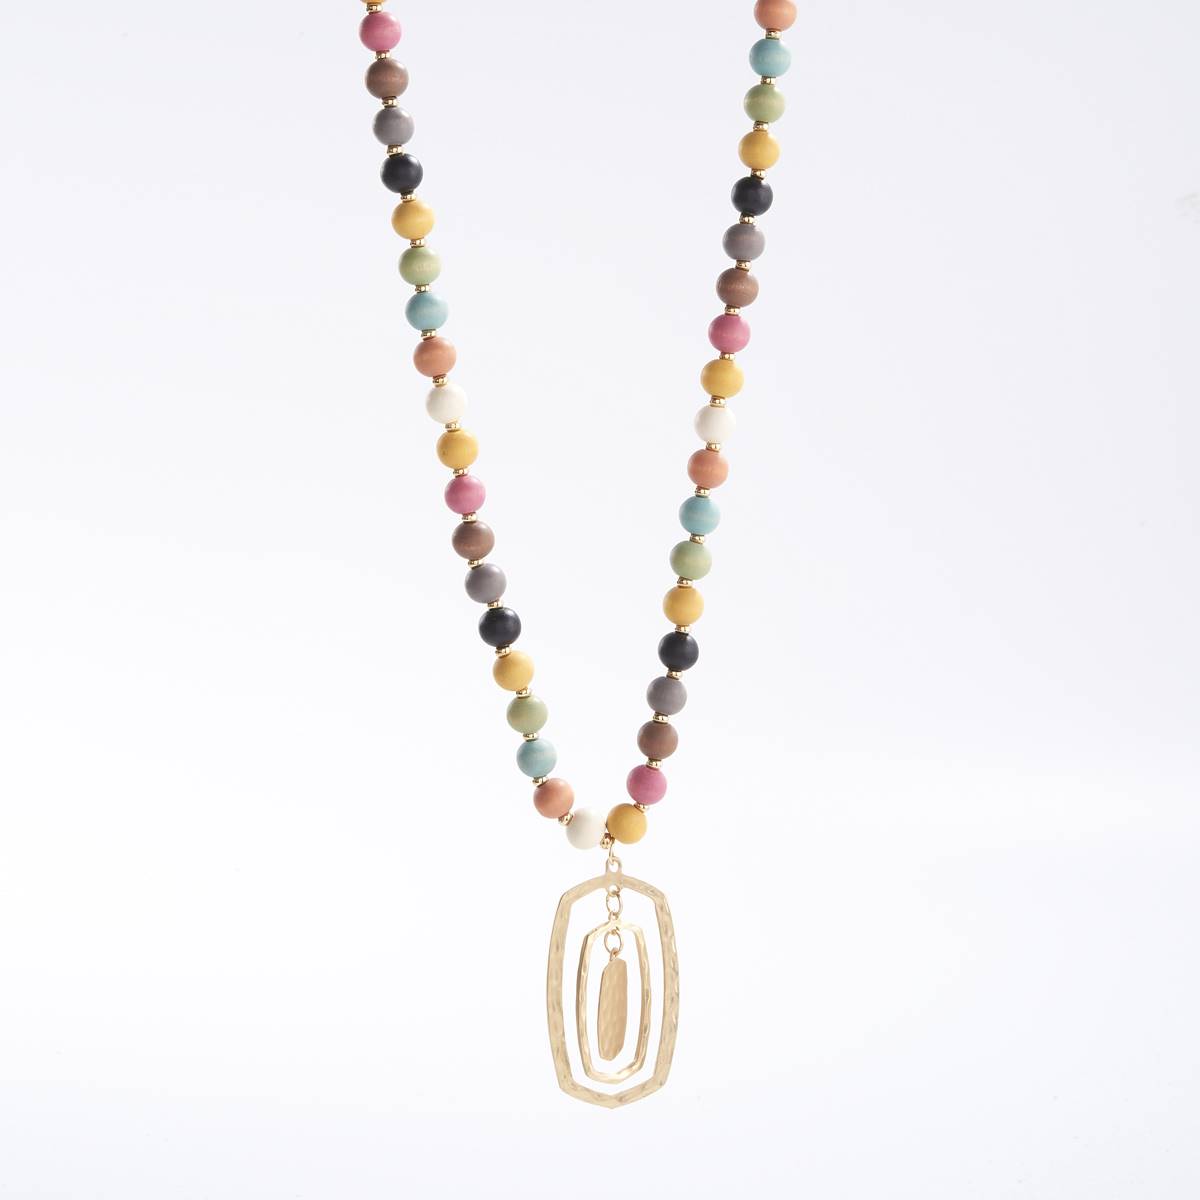 Ashley Cooper(tm) Wood Bead Multi-Color Necklace W/Hammered Pendant